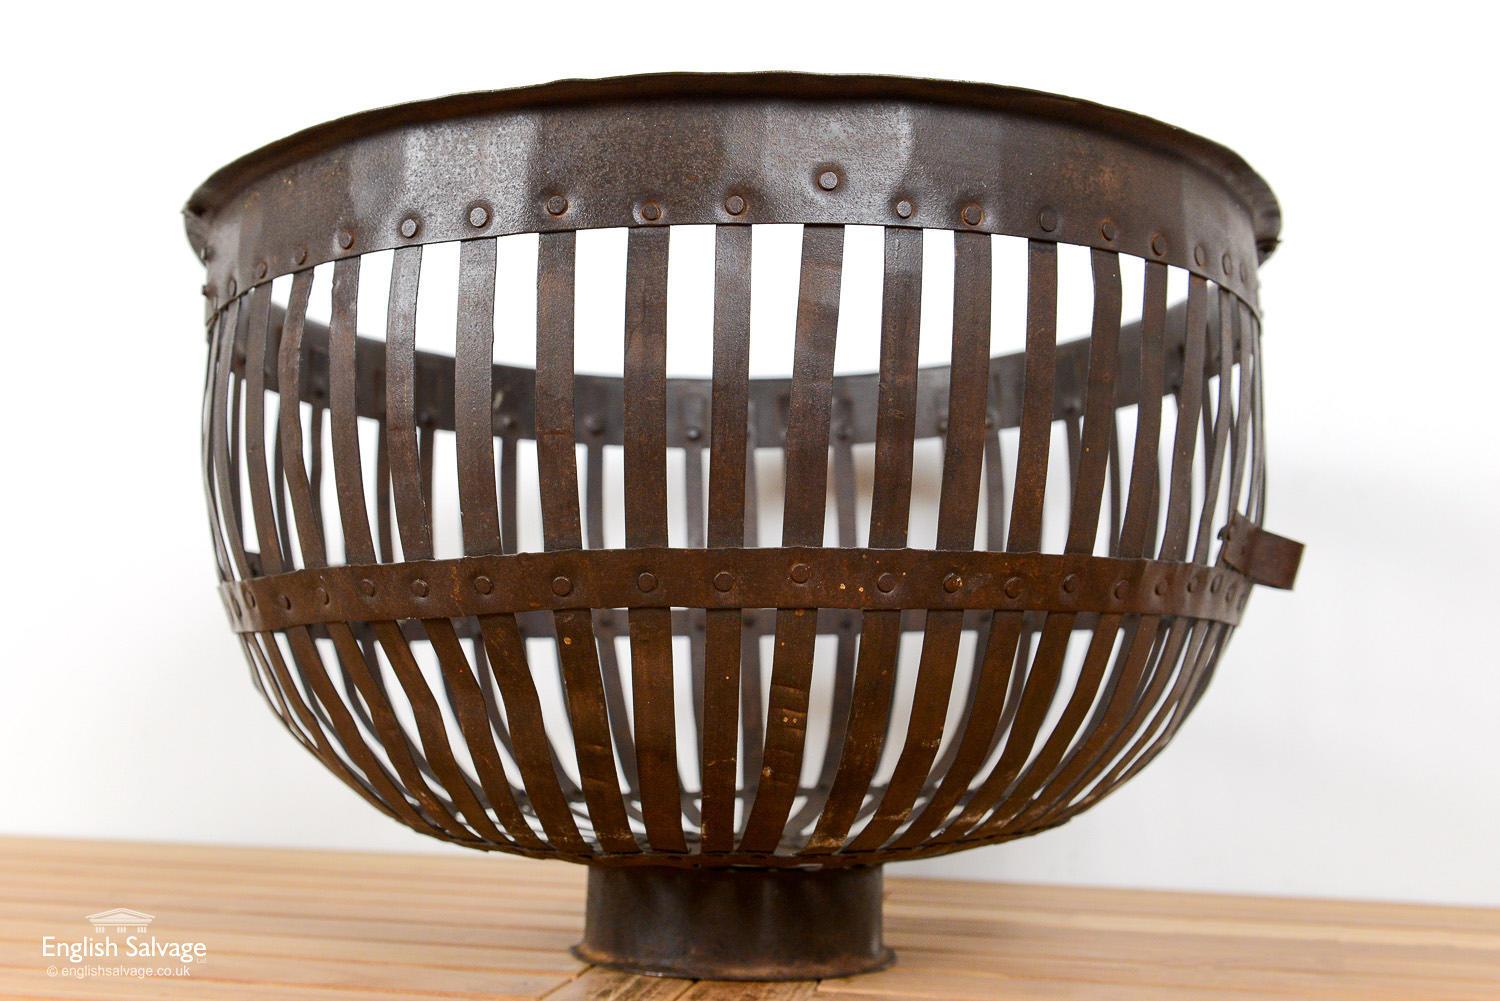 Reclaimed large iron basket with slatted sides, studded detailing around the rim and two bands below. The storage basket has two small handles and is set on a smaller circular base. Some tarnishing and wear due to past use.